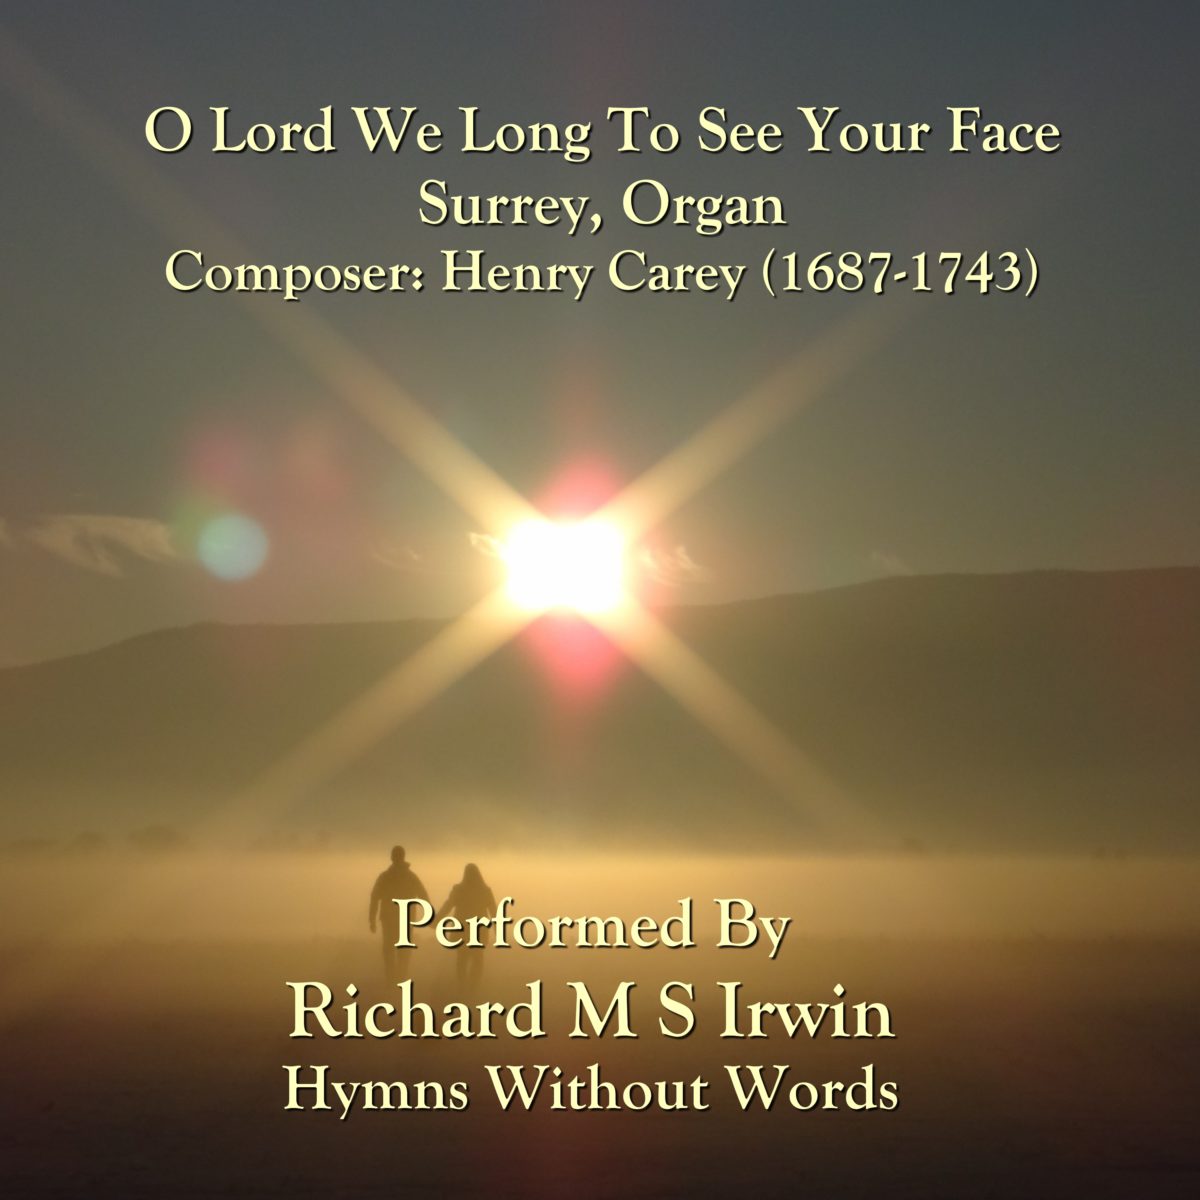 O Lord We Long To See Your Face (Surrey, Organ, 4 Verses)